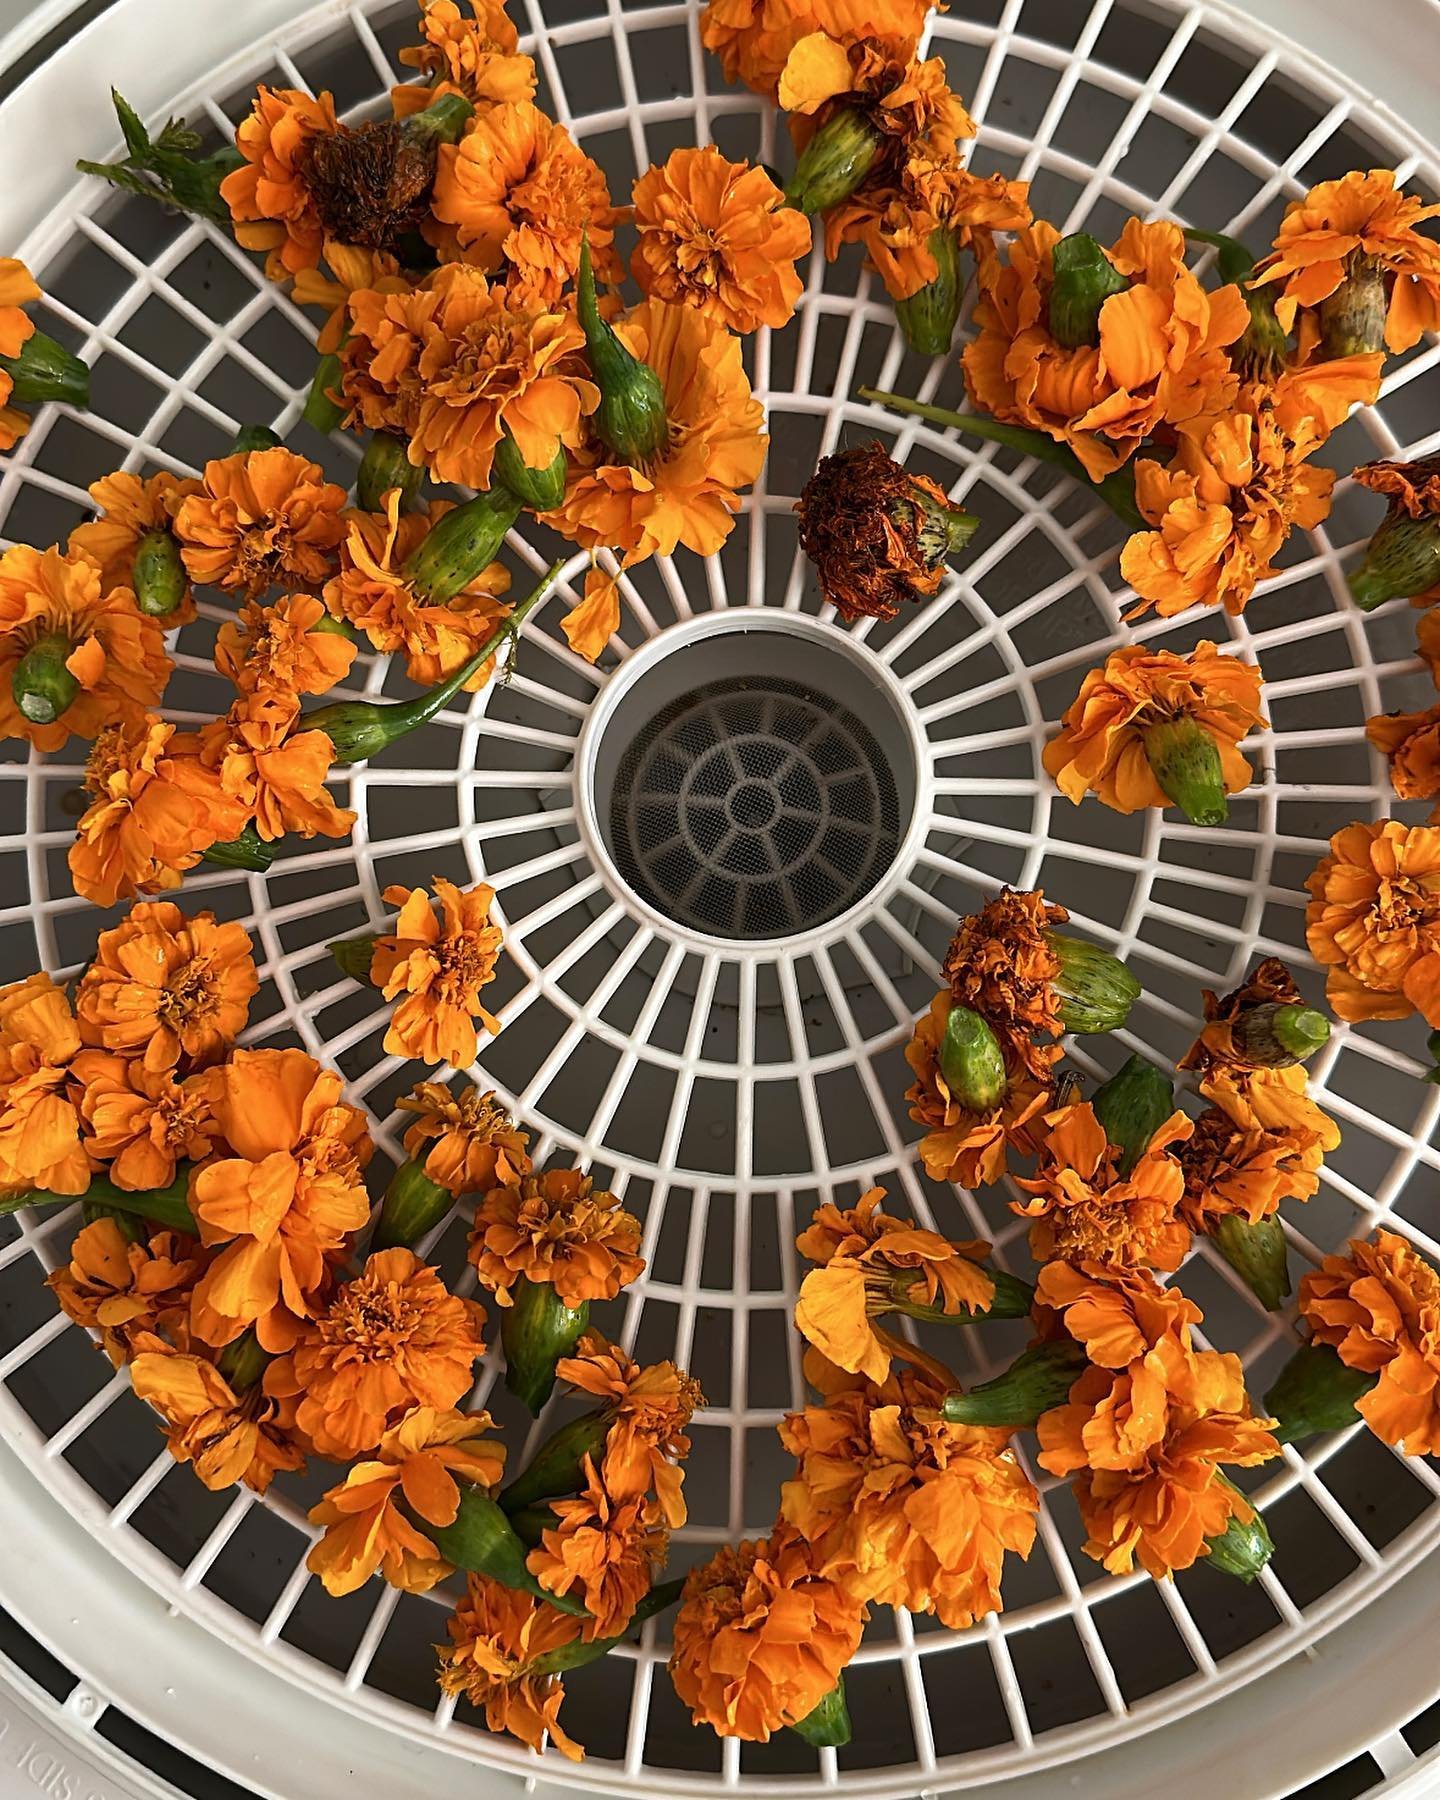 Trying a new thing &amp; dehydrating some Marigolds for tea! Supposed to be packed full of health benefits! 🌸